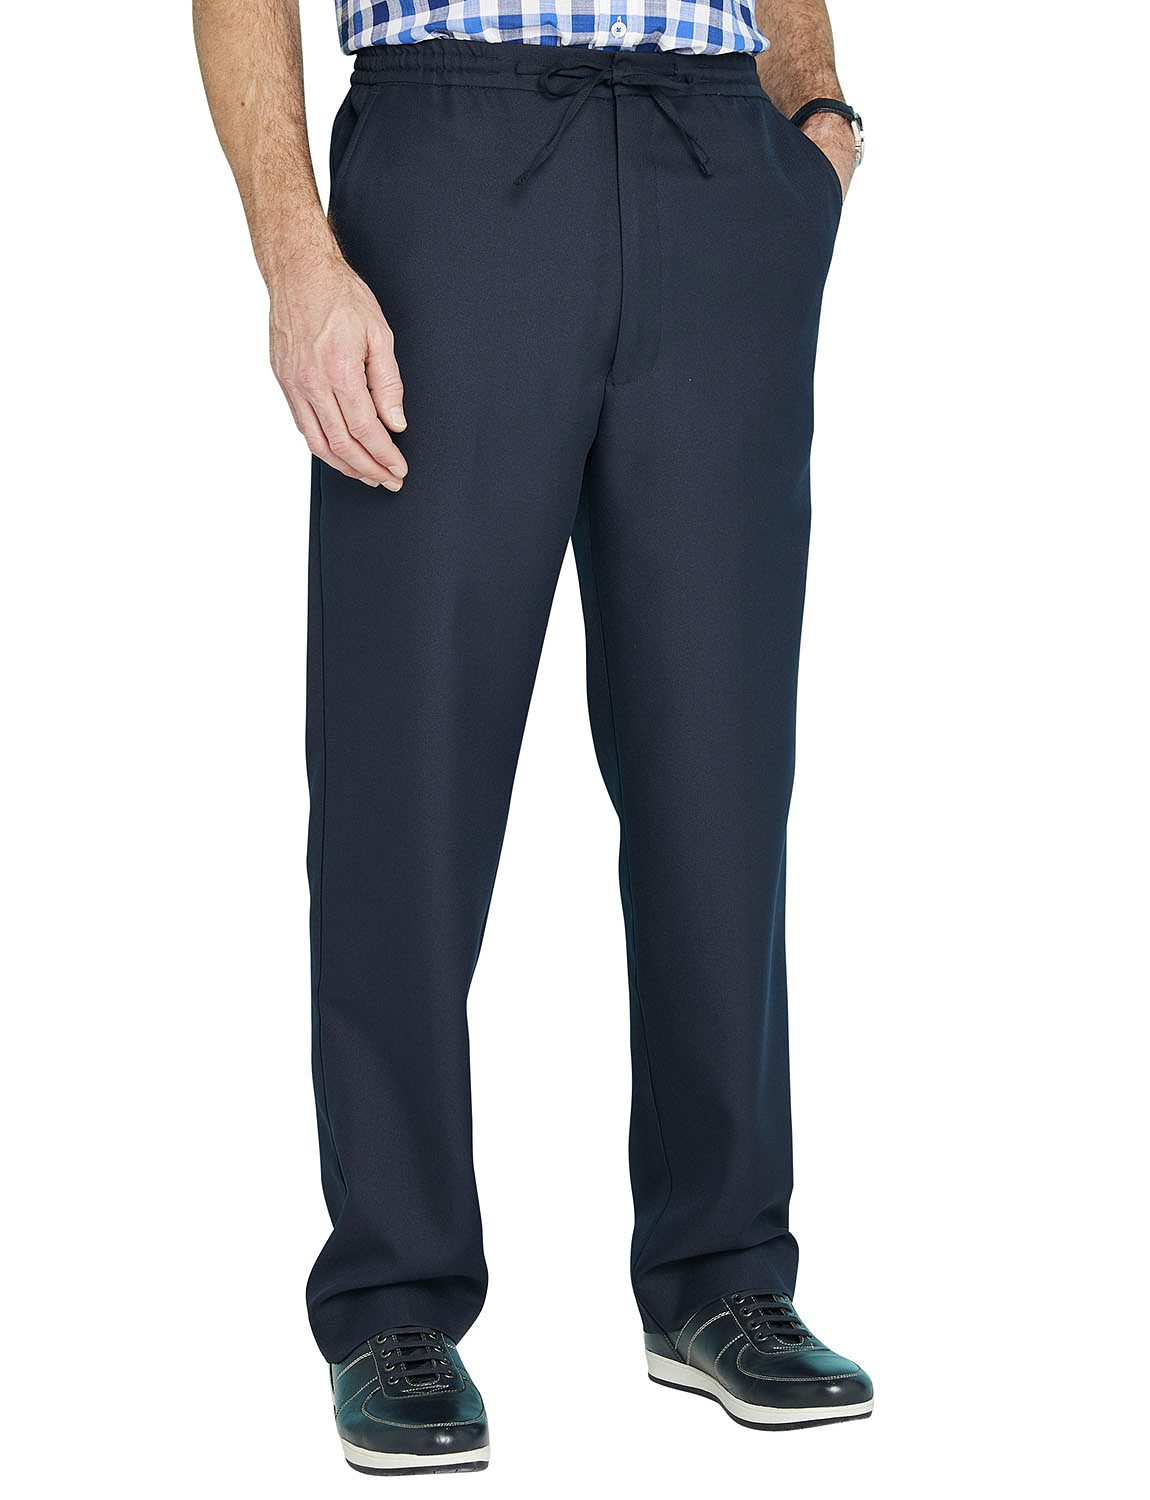 The Fitting Room Fully Elasticated Woven Trouser | Chums